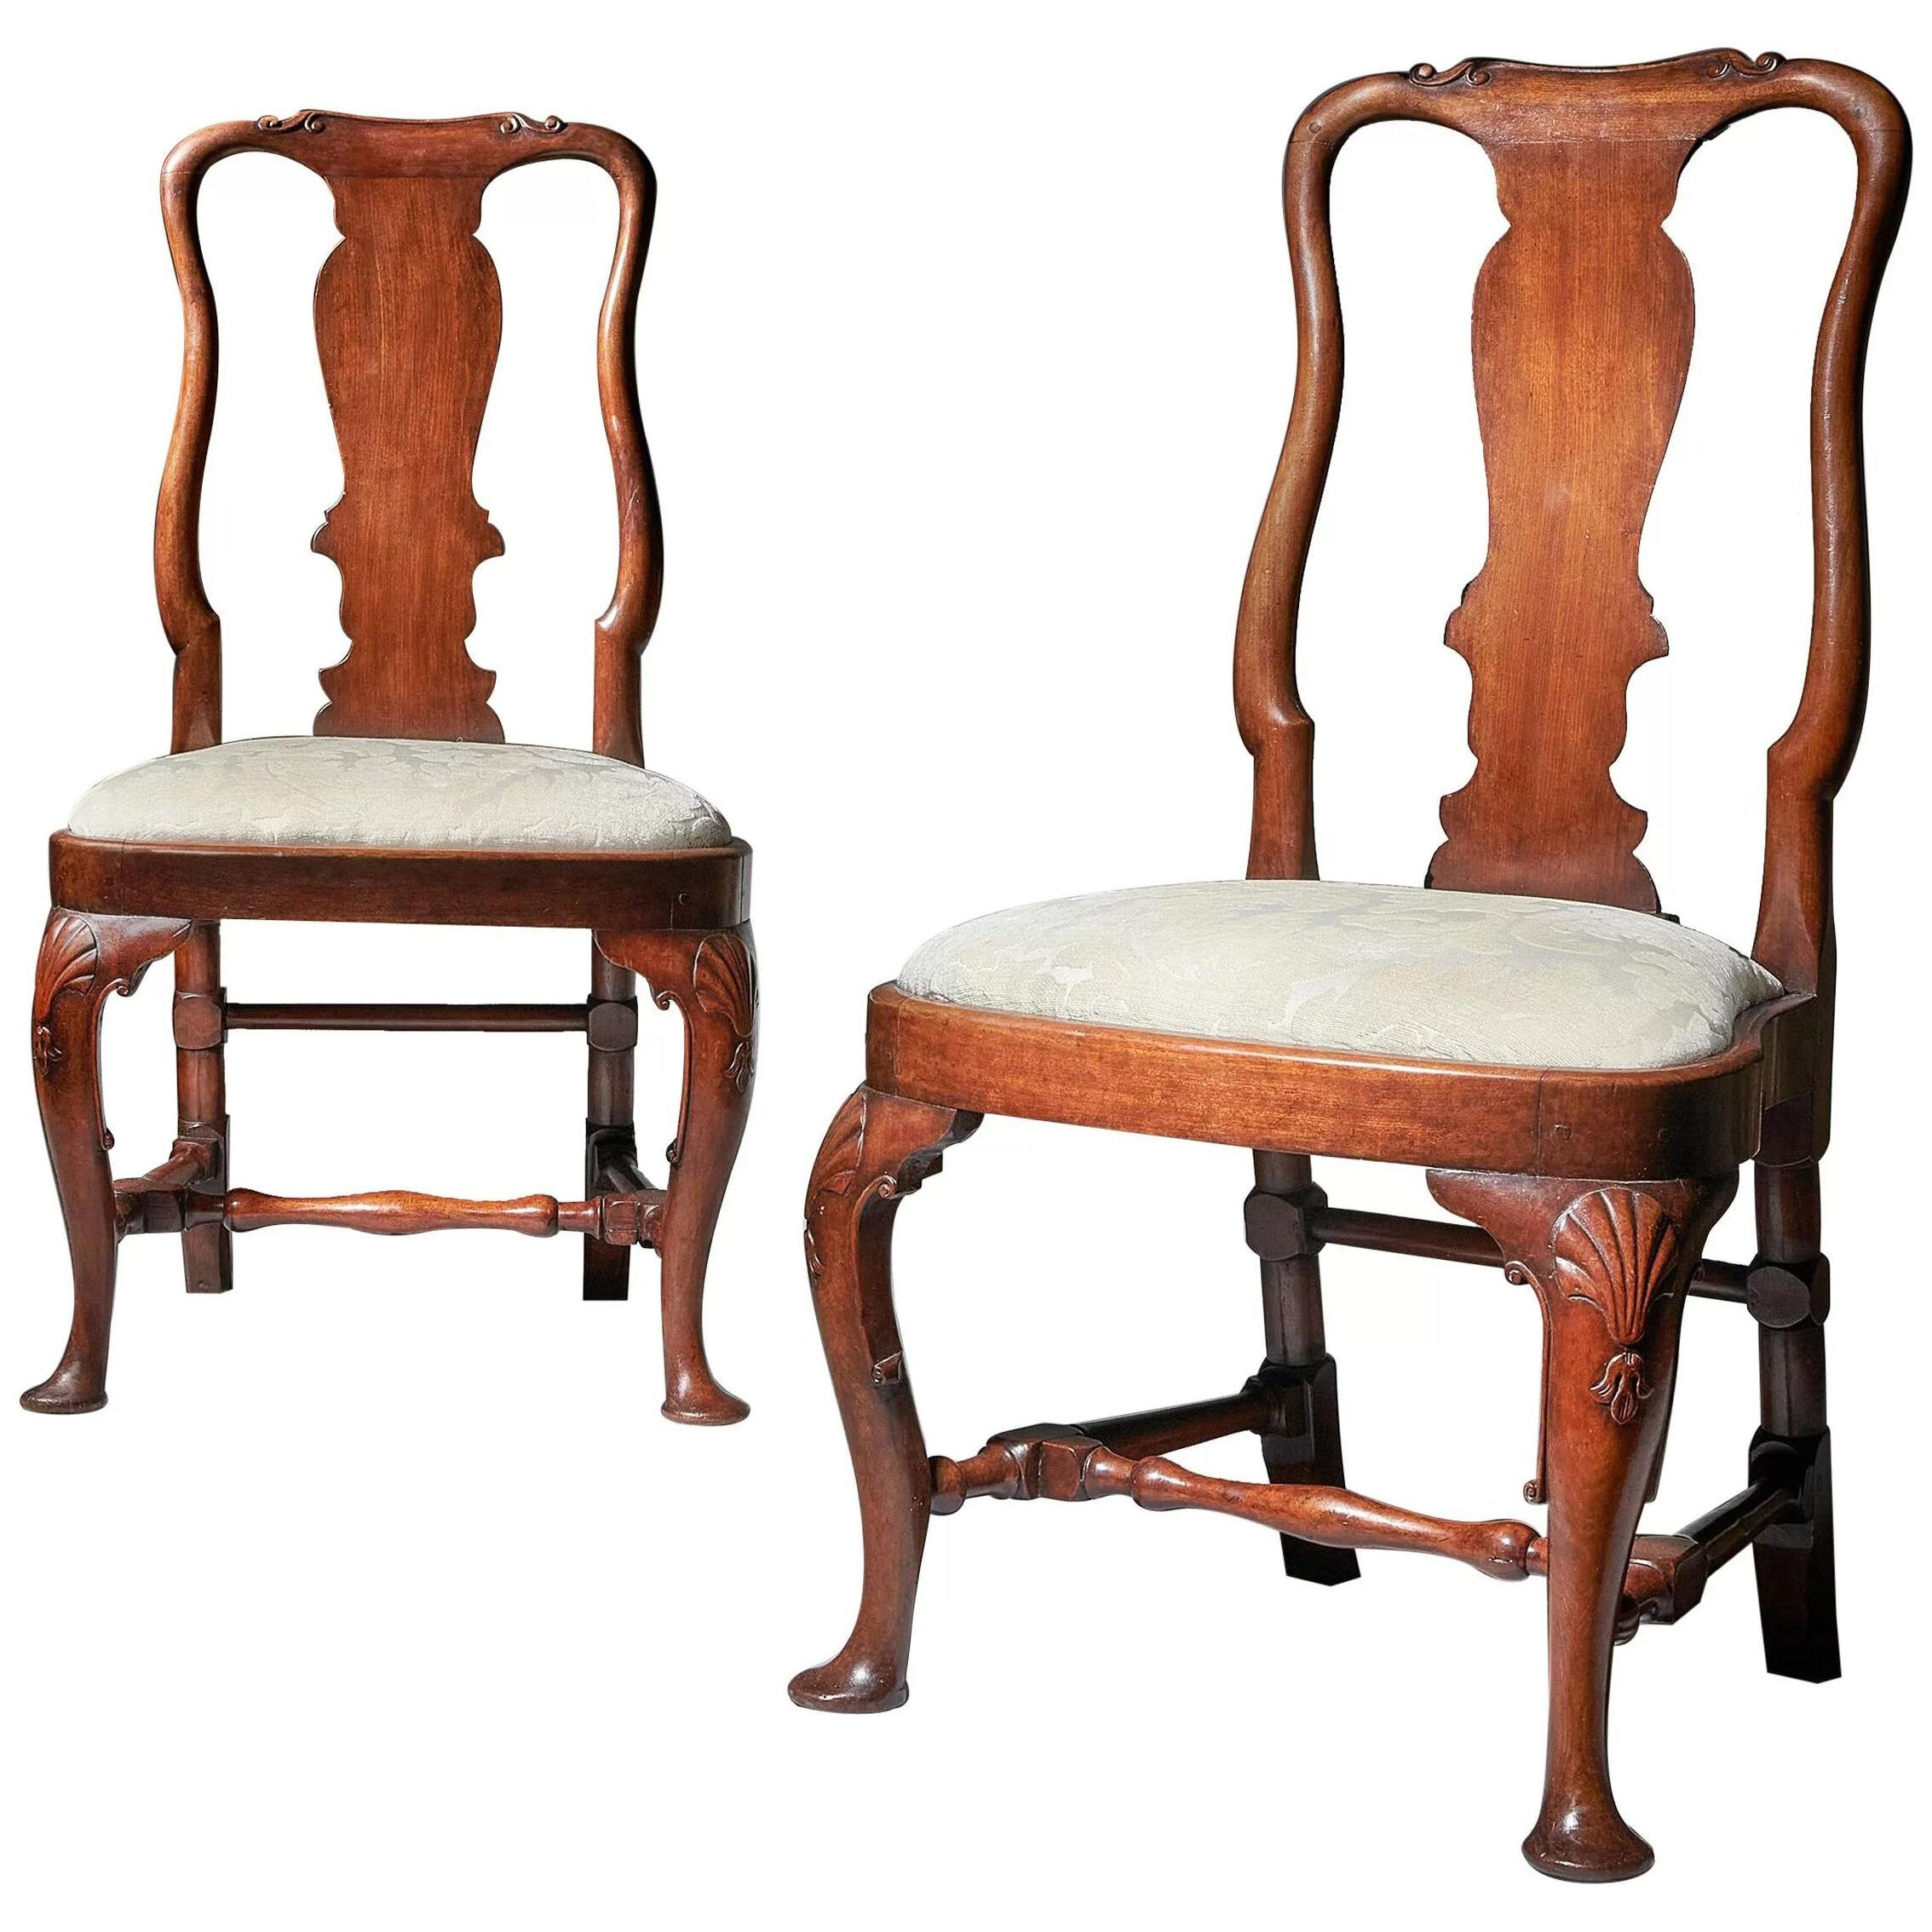 Pair of George I 18th Century Carved Mahogany Chairs, Circa 1720